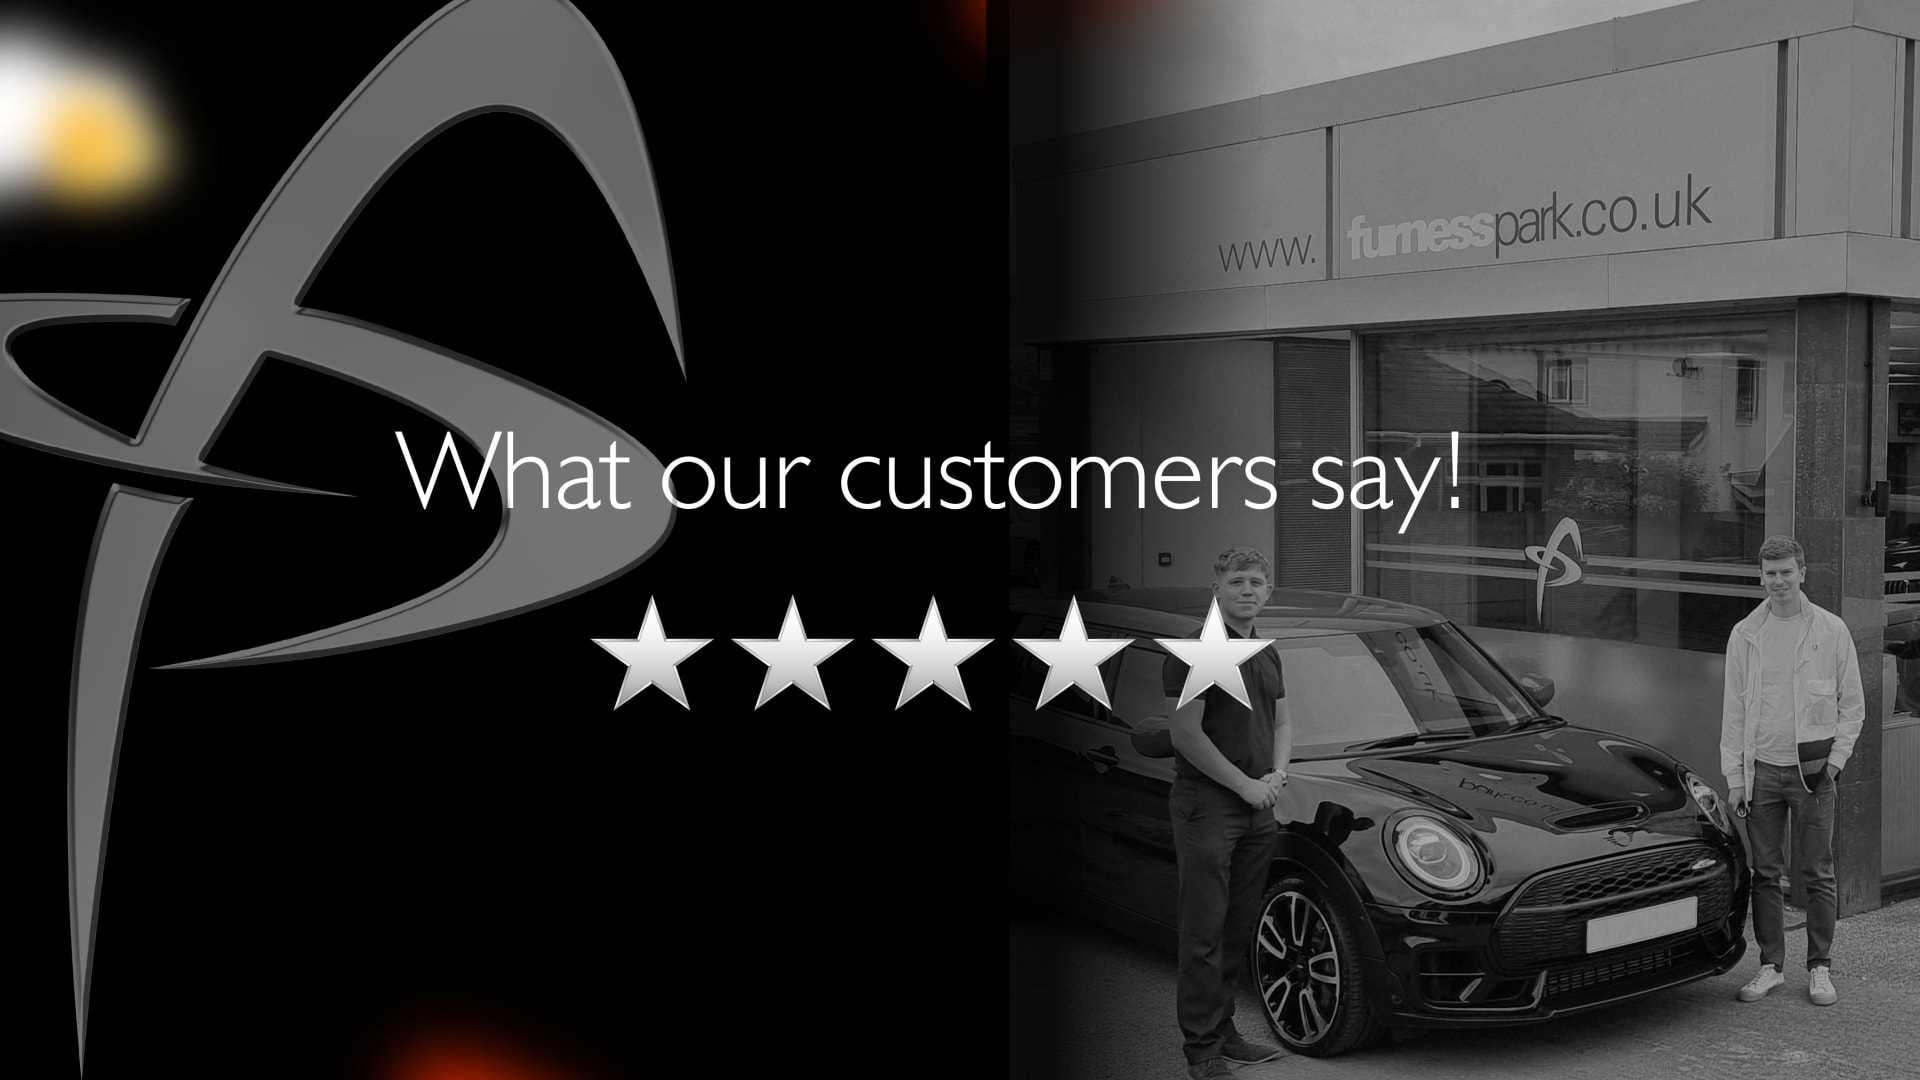 Find out what our customers say